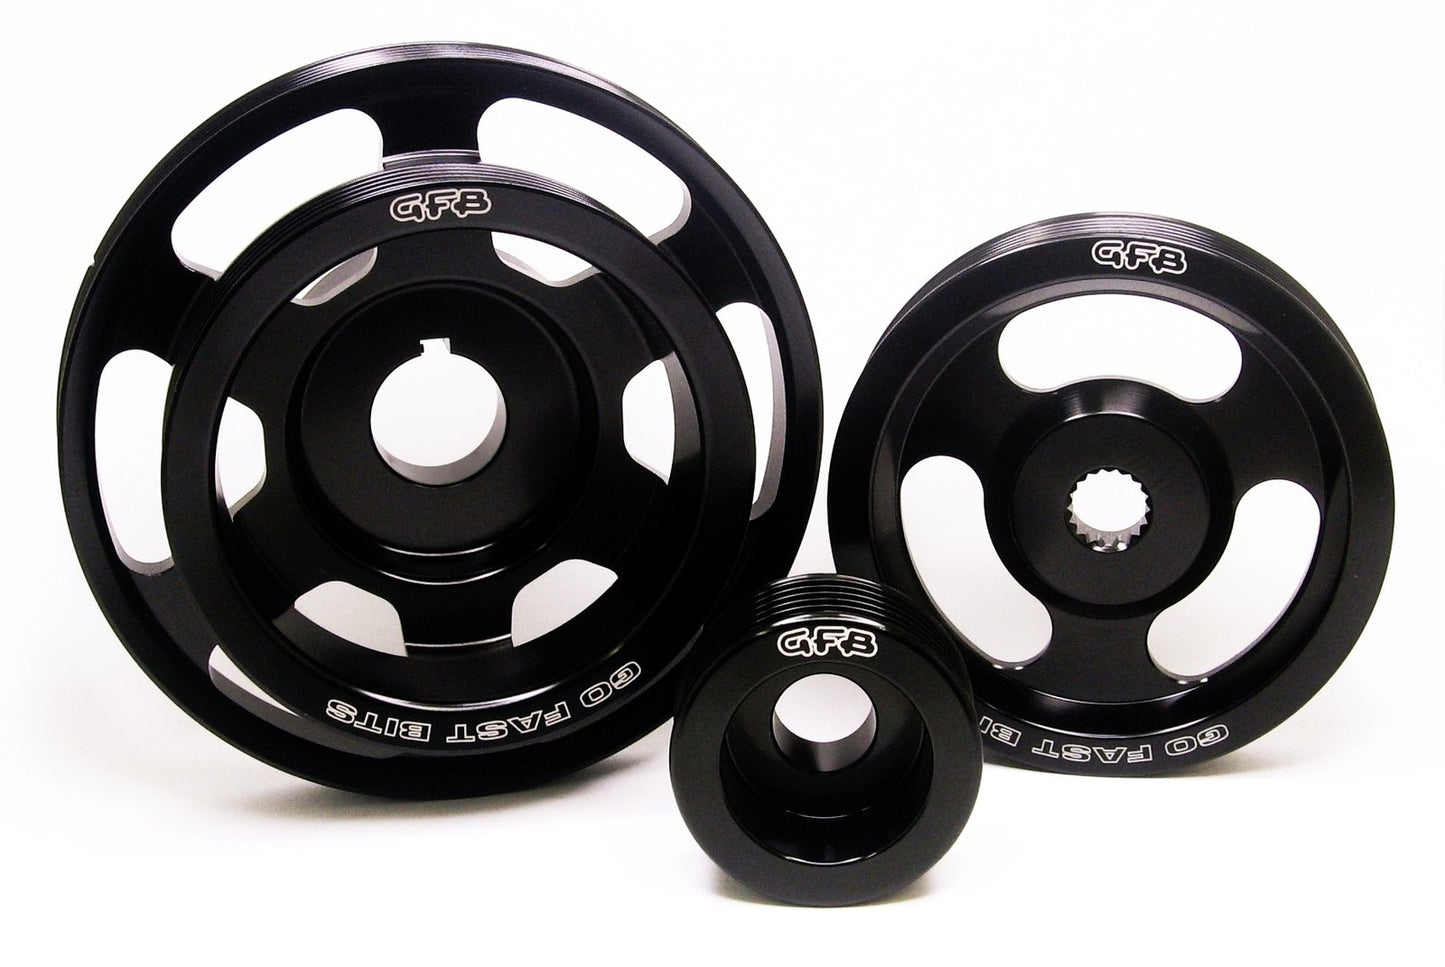 GFB - Respons TMS BOV + Short Shift Kit + Pulley Package - (Liberty 03-12)